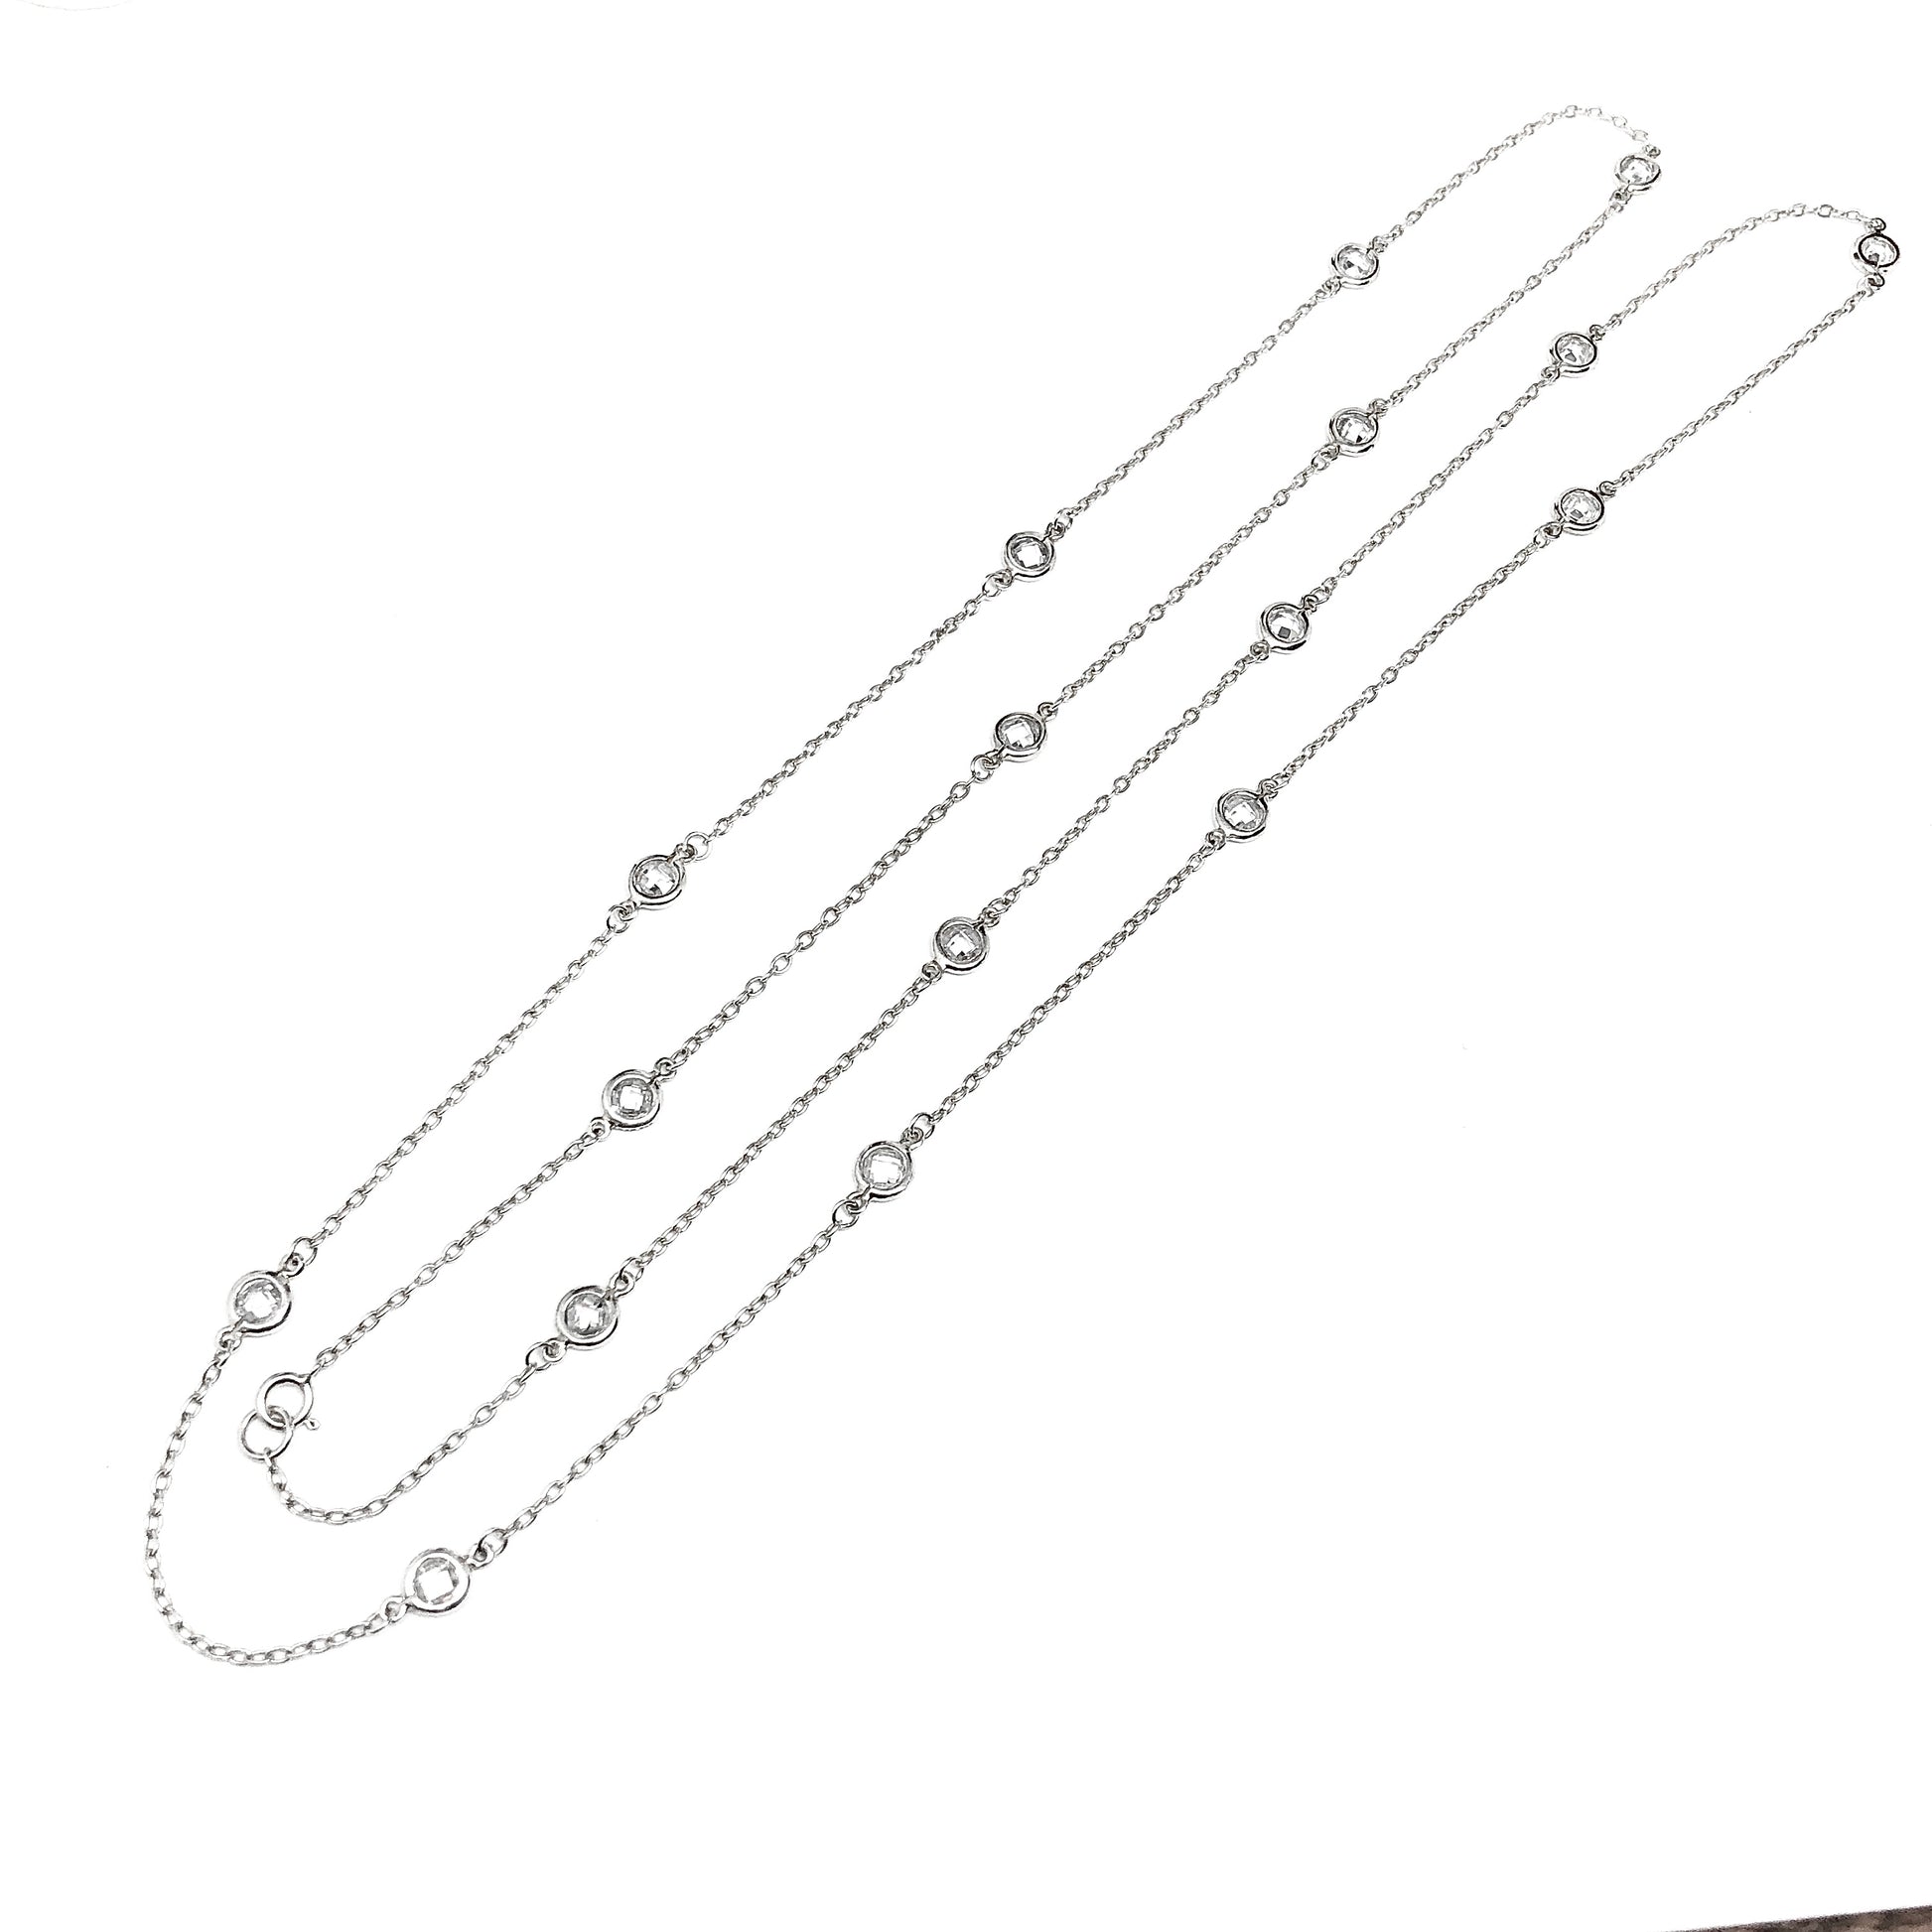 36in 925 Silver White Crystal Station Satellite Chain Necklace 